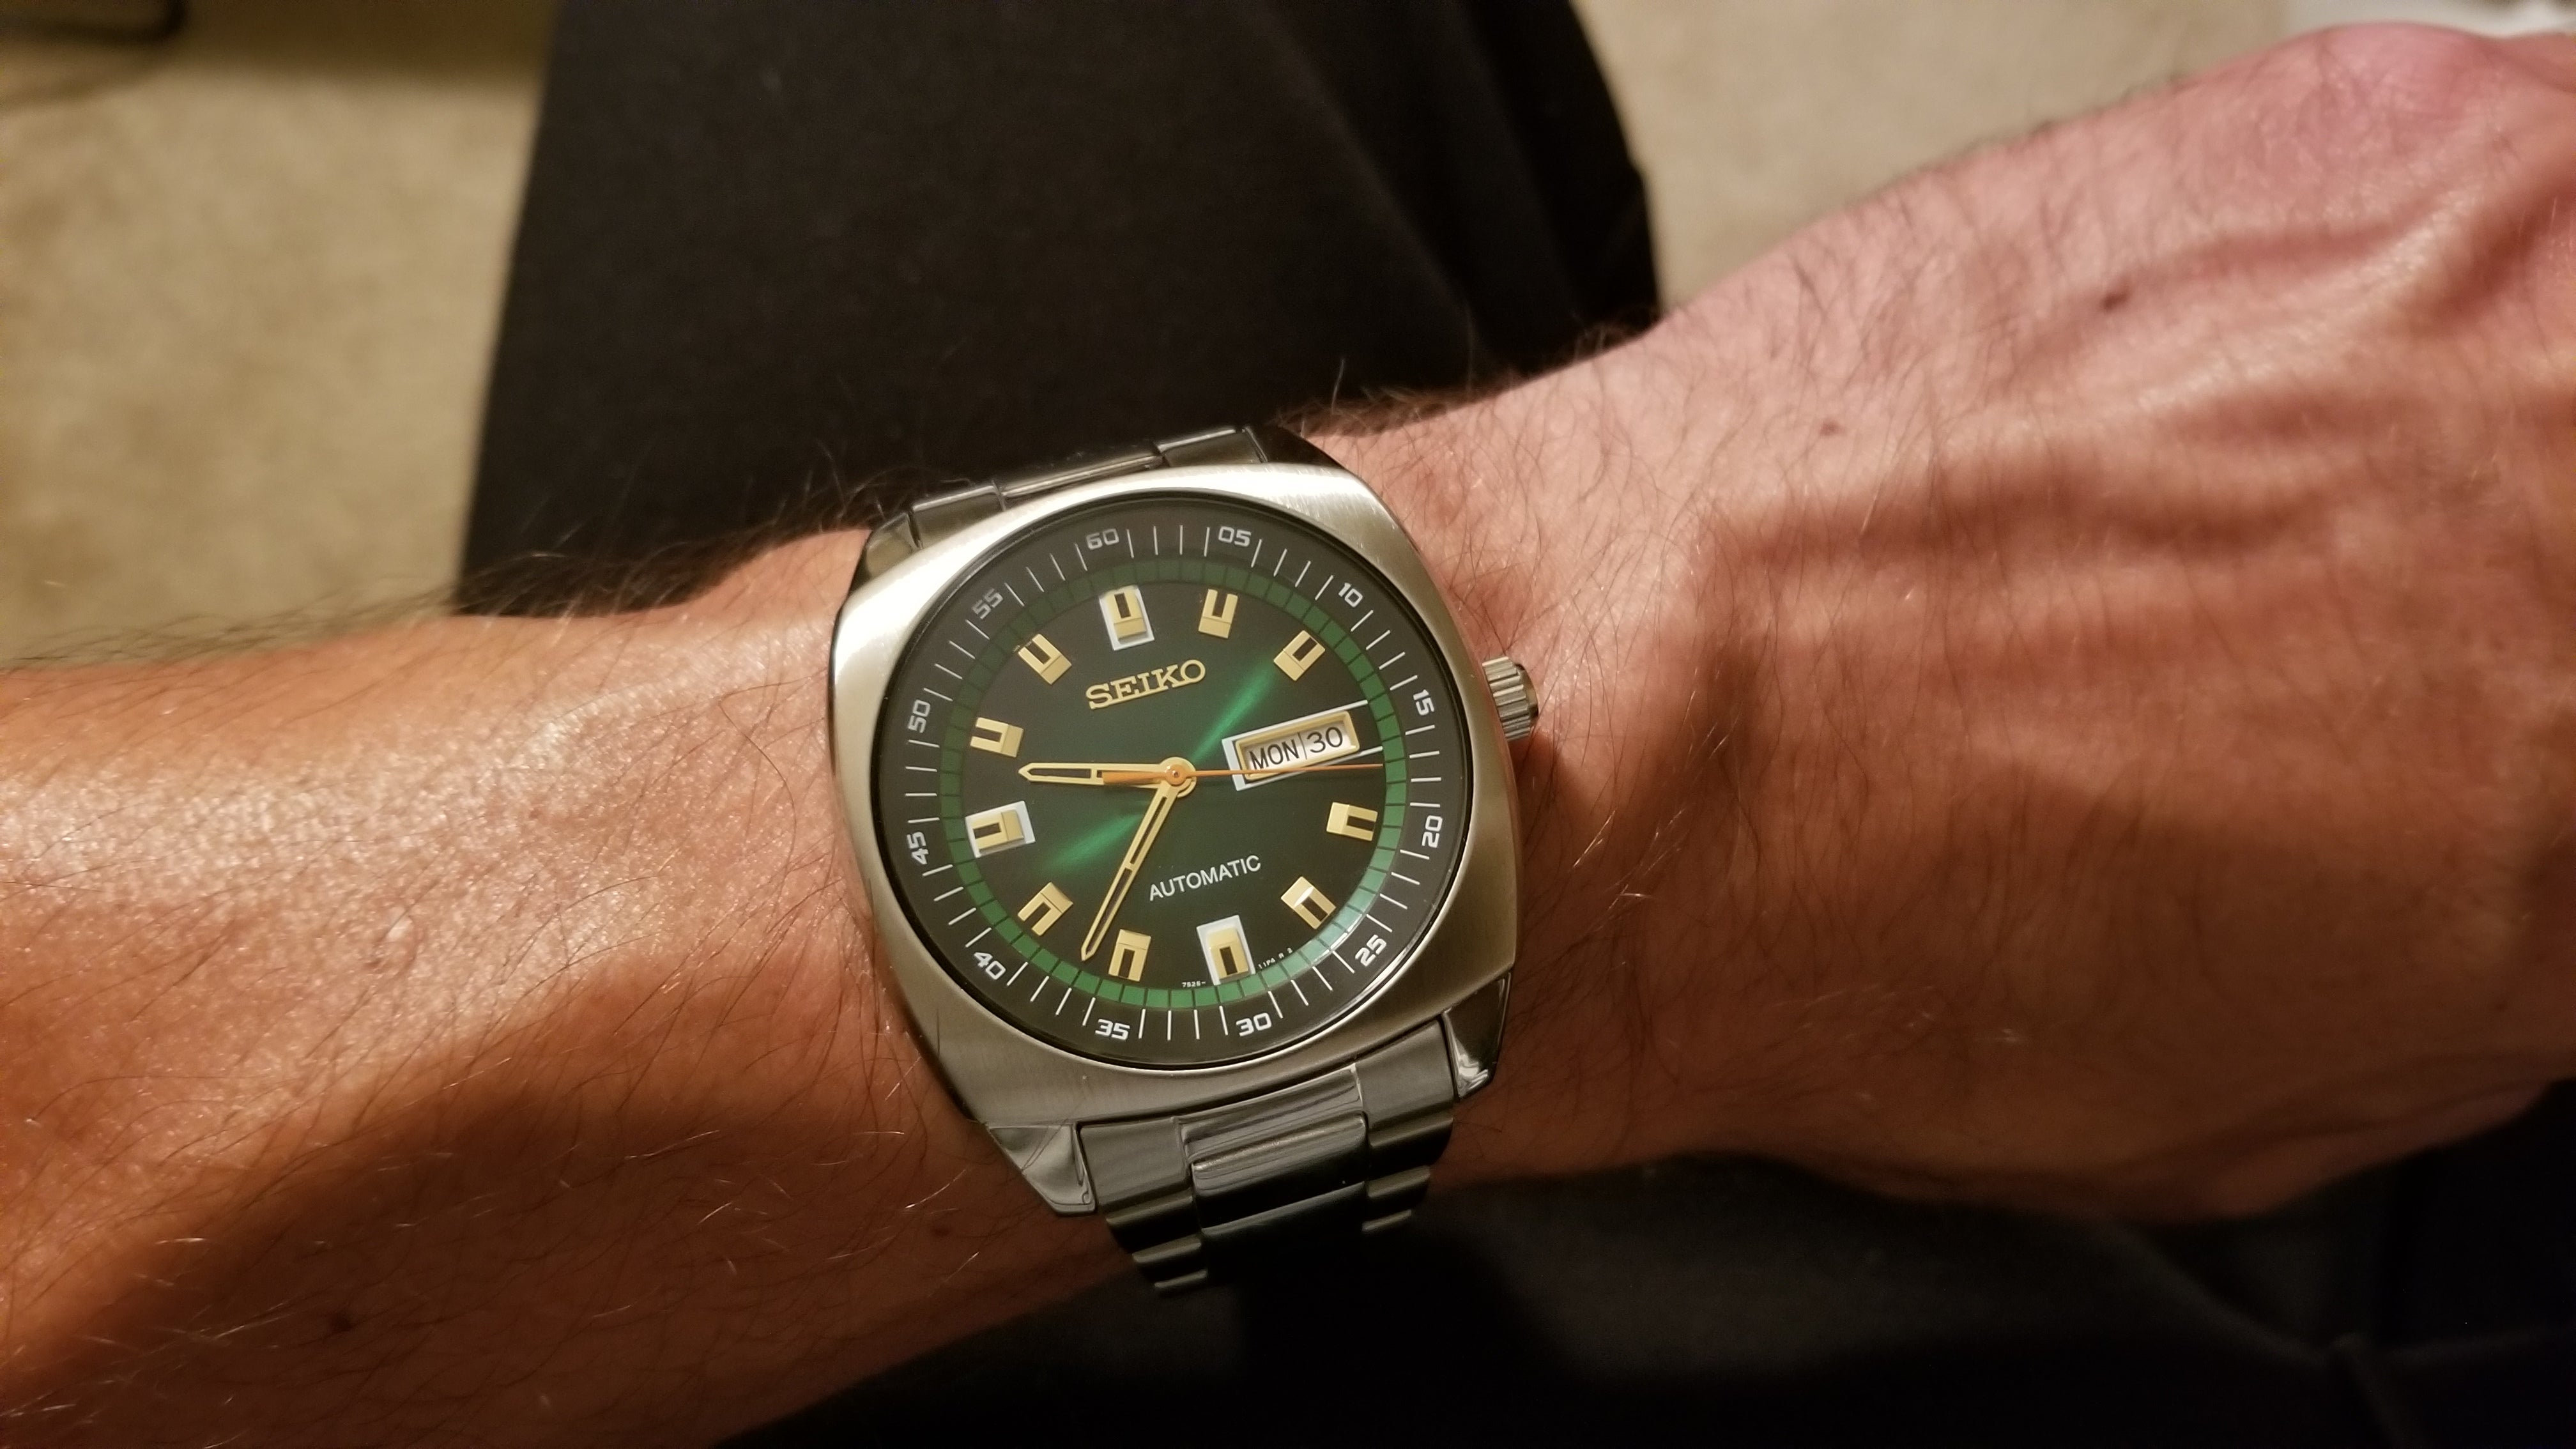 Very short reserve time on my Seiko Recraft SNKM97 | WatchUSeek Watch Forums